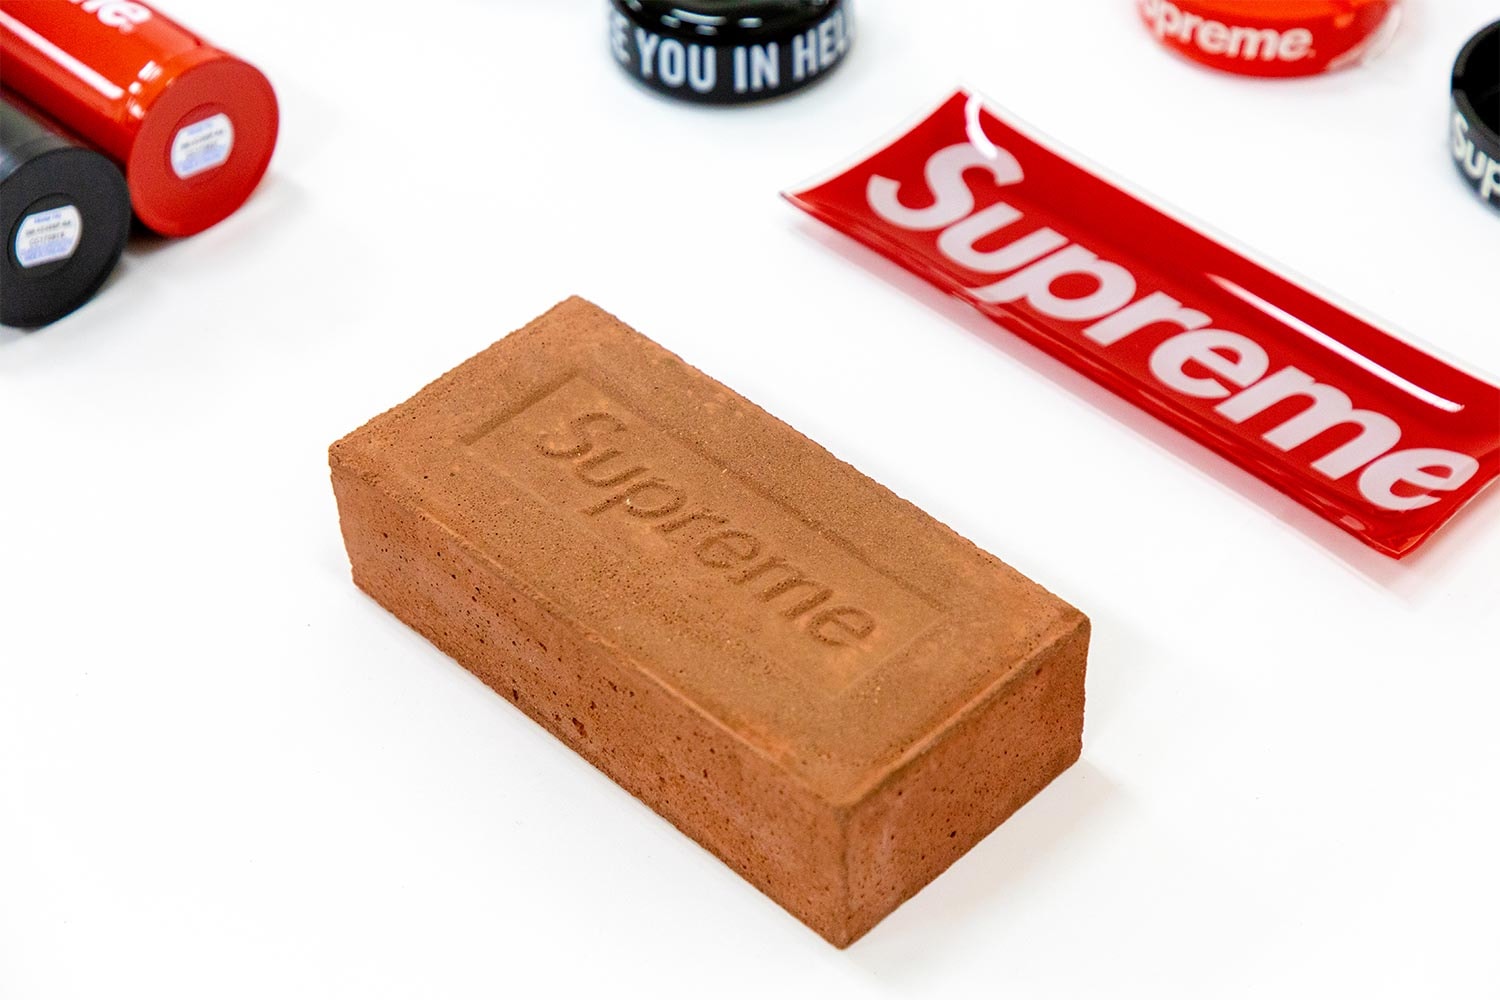 Sotheby's Supreme Accessories Auction News box logo skate new york louis vuitton punching bag edc scarface bogo stickers brick red anti hero B&O 